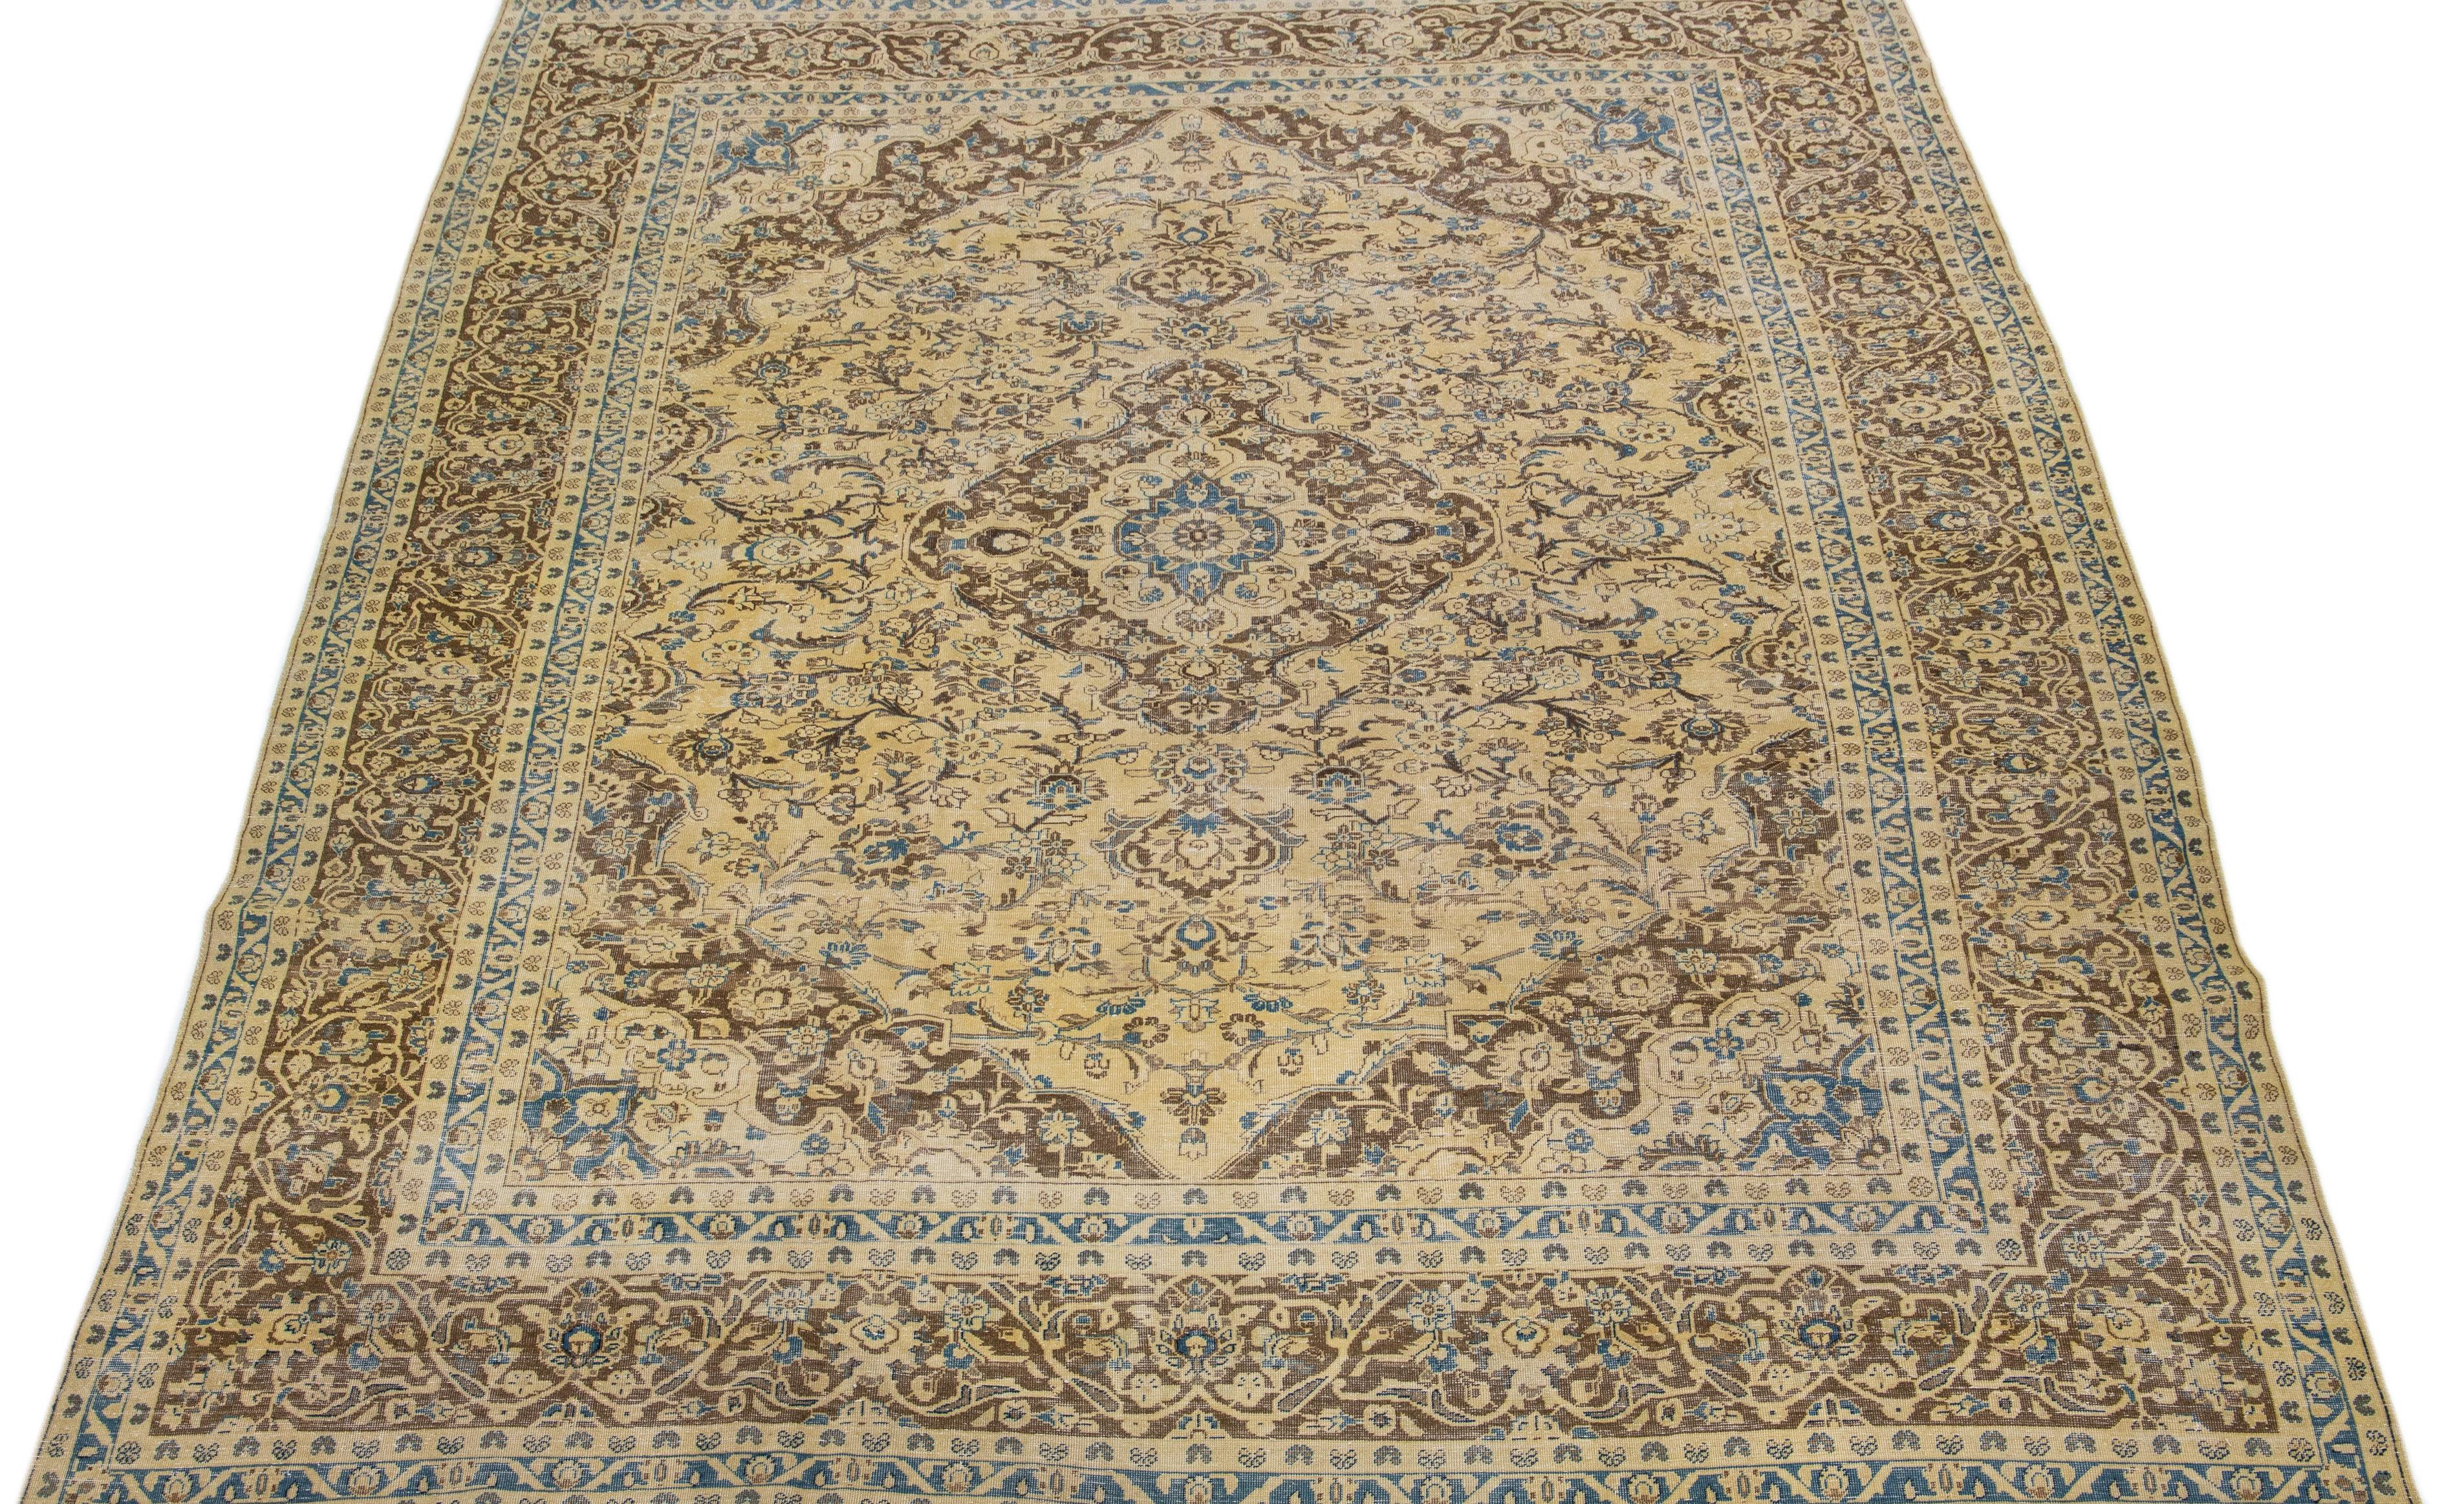 This vintage Tabriz rug boasts a beige color field and features exquisite, hand-knotted wool construction complemented by hints of brown and blue in an all-over medallion floral pattern.

This rug measures: 9'4